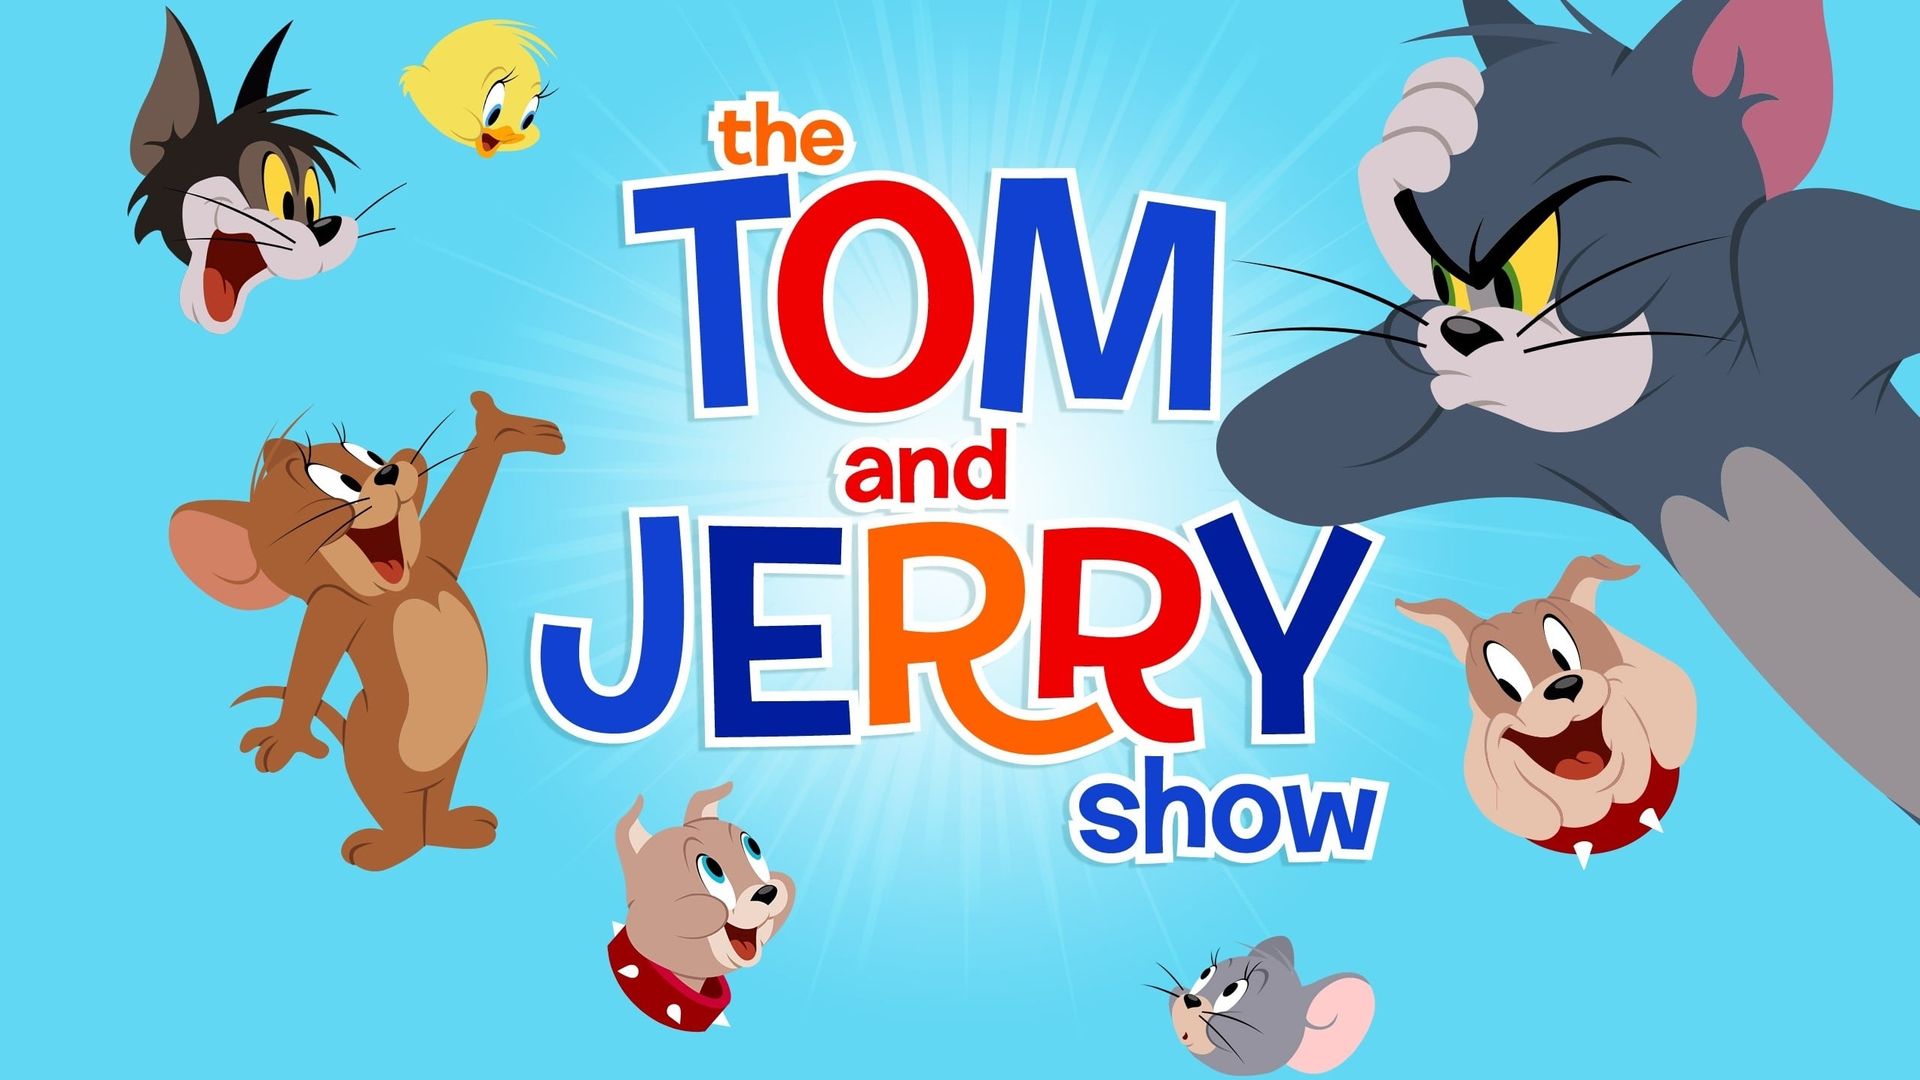 The Tom and Jerry Comedy Show background